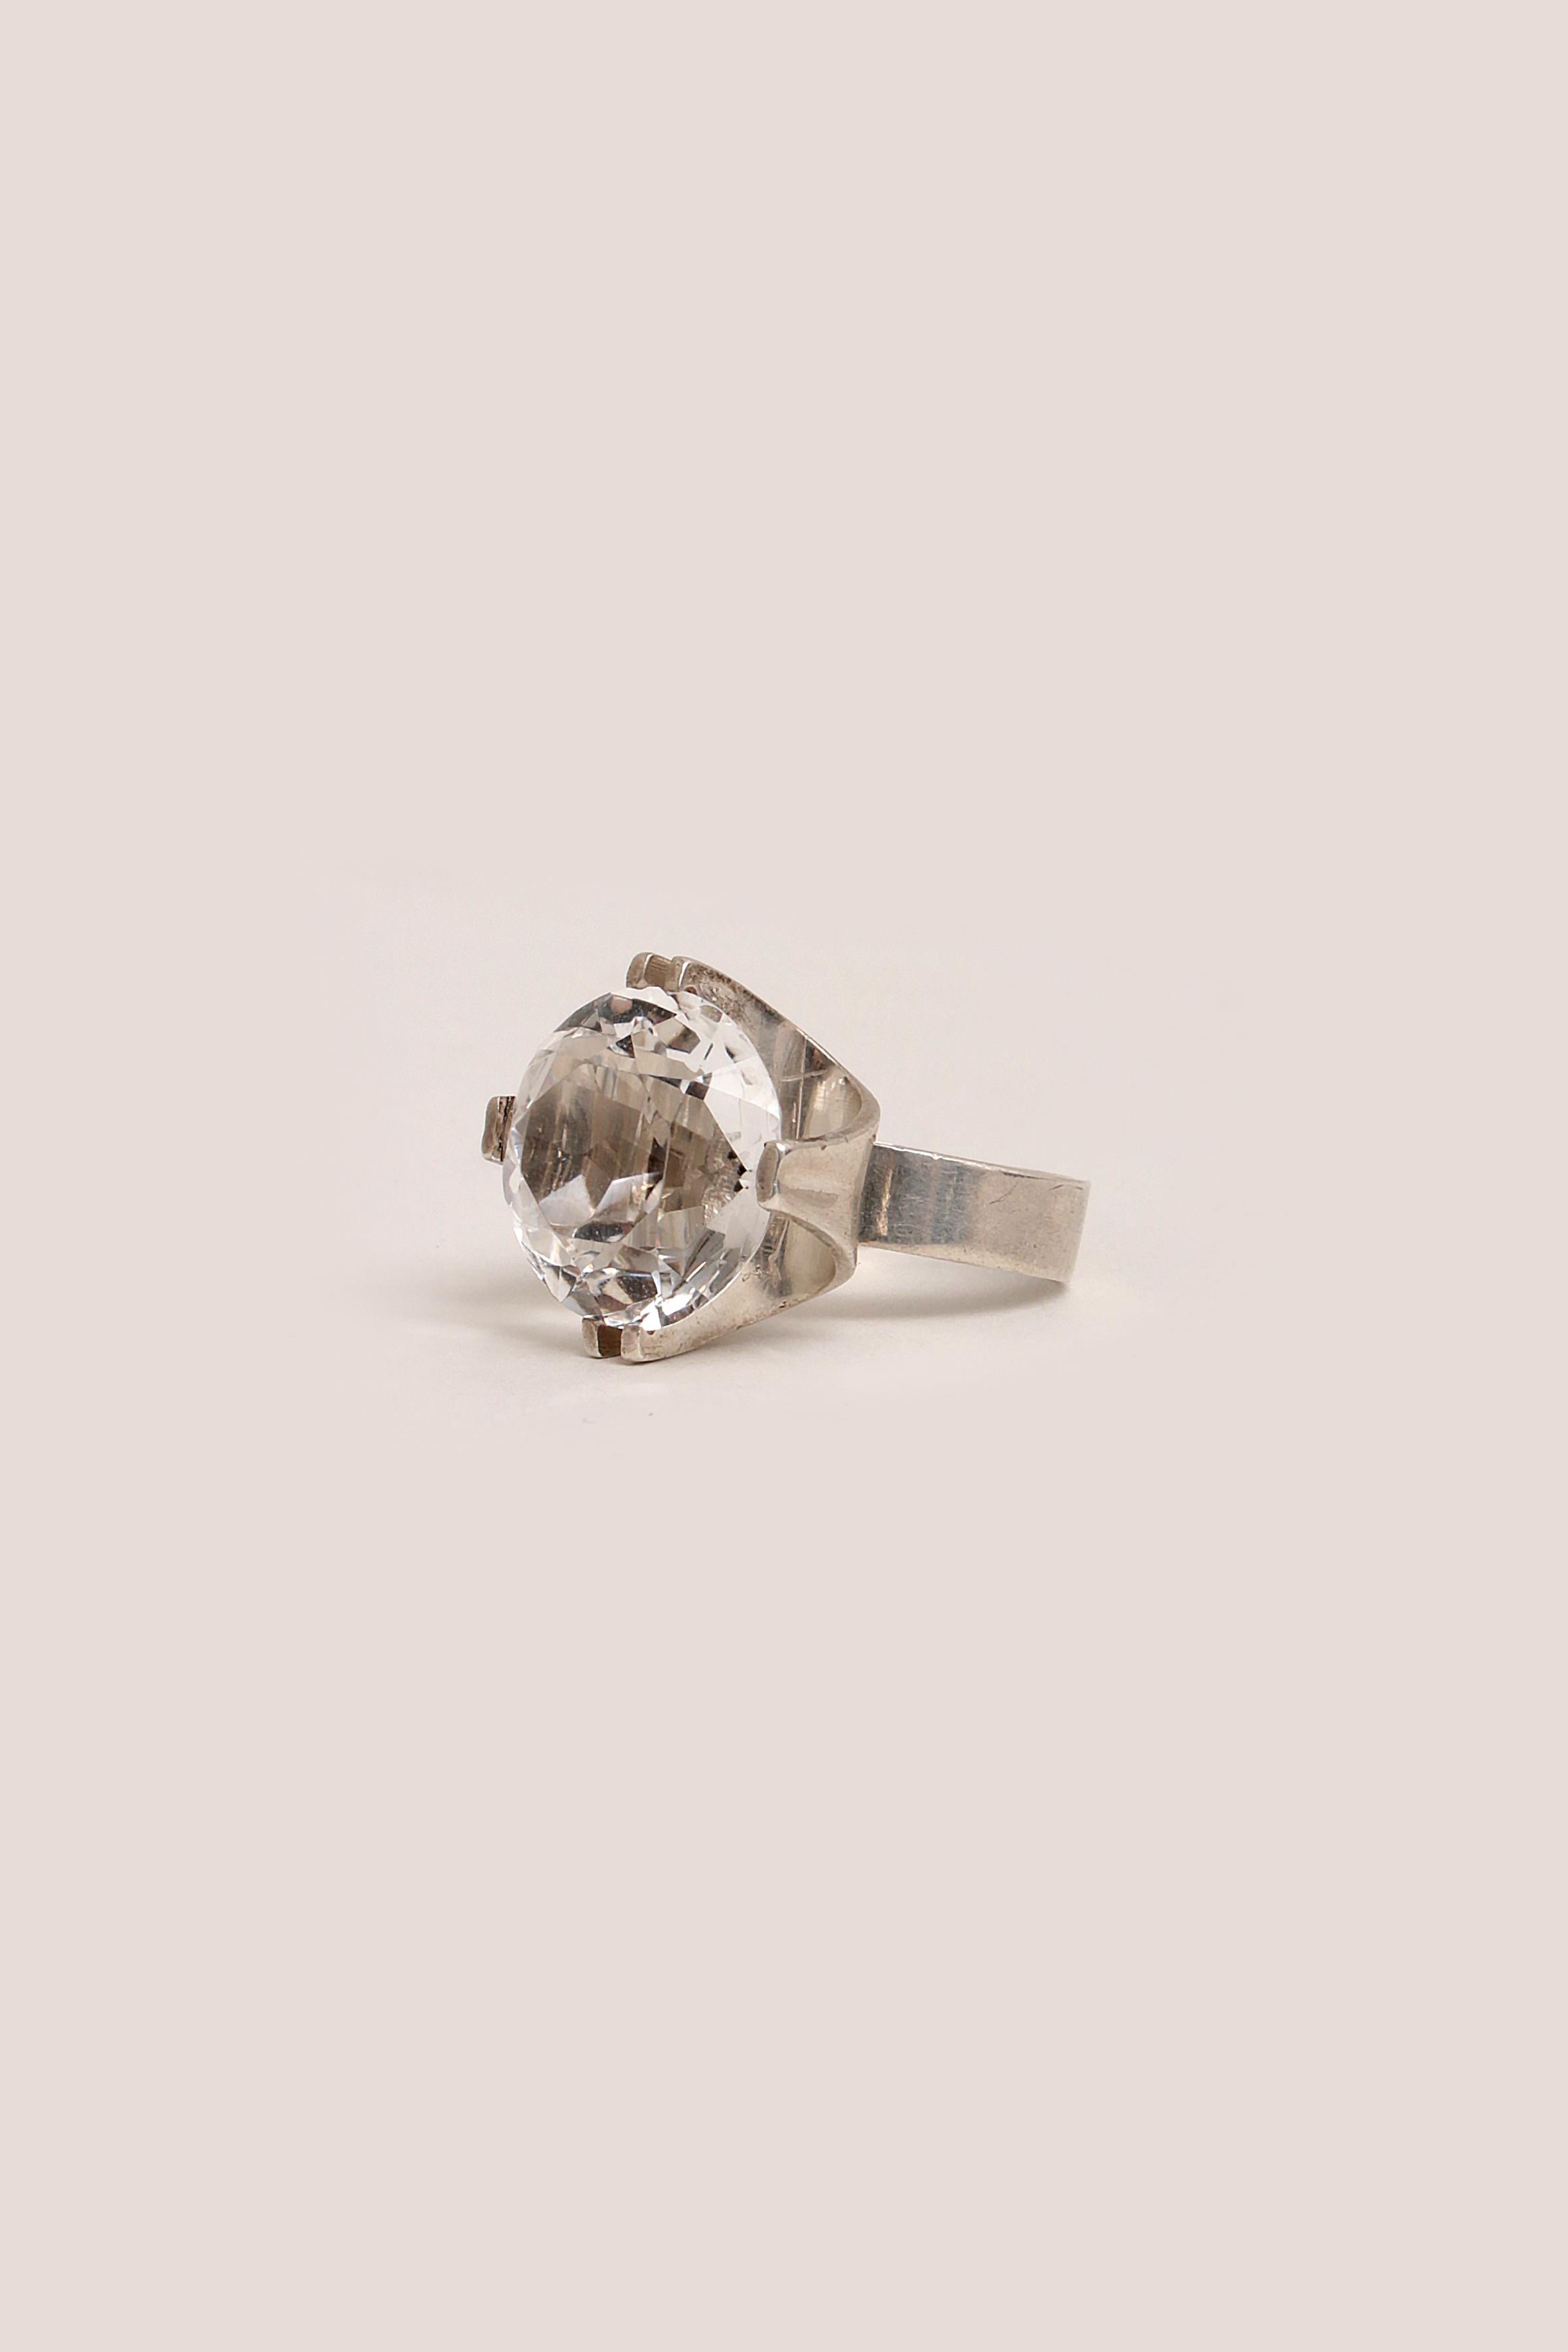 Silver ring with rock crystal design Ellis Kauppi, Finland 1975

  Silver ring with rock crystal design Ellis Kauppi, Finland 1975

Beautiful ring size 19.2 cm in diameter.

Elis Kauppi was one of the most vital figures in Finnish jewelry design,